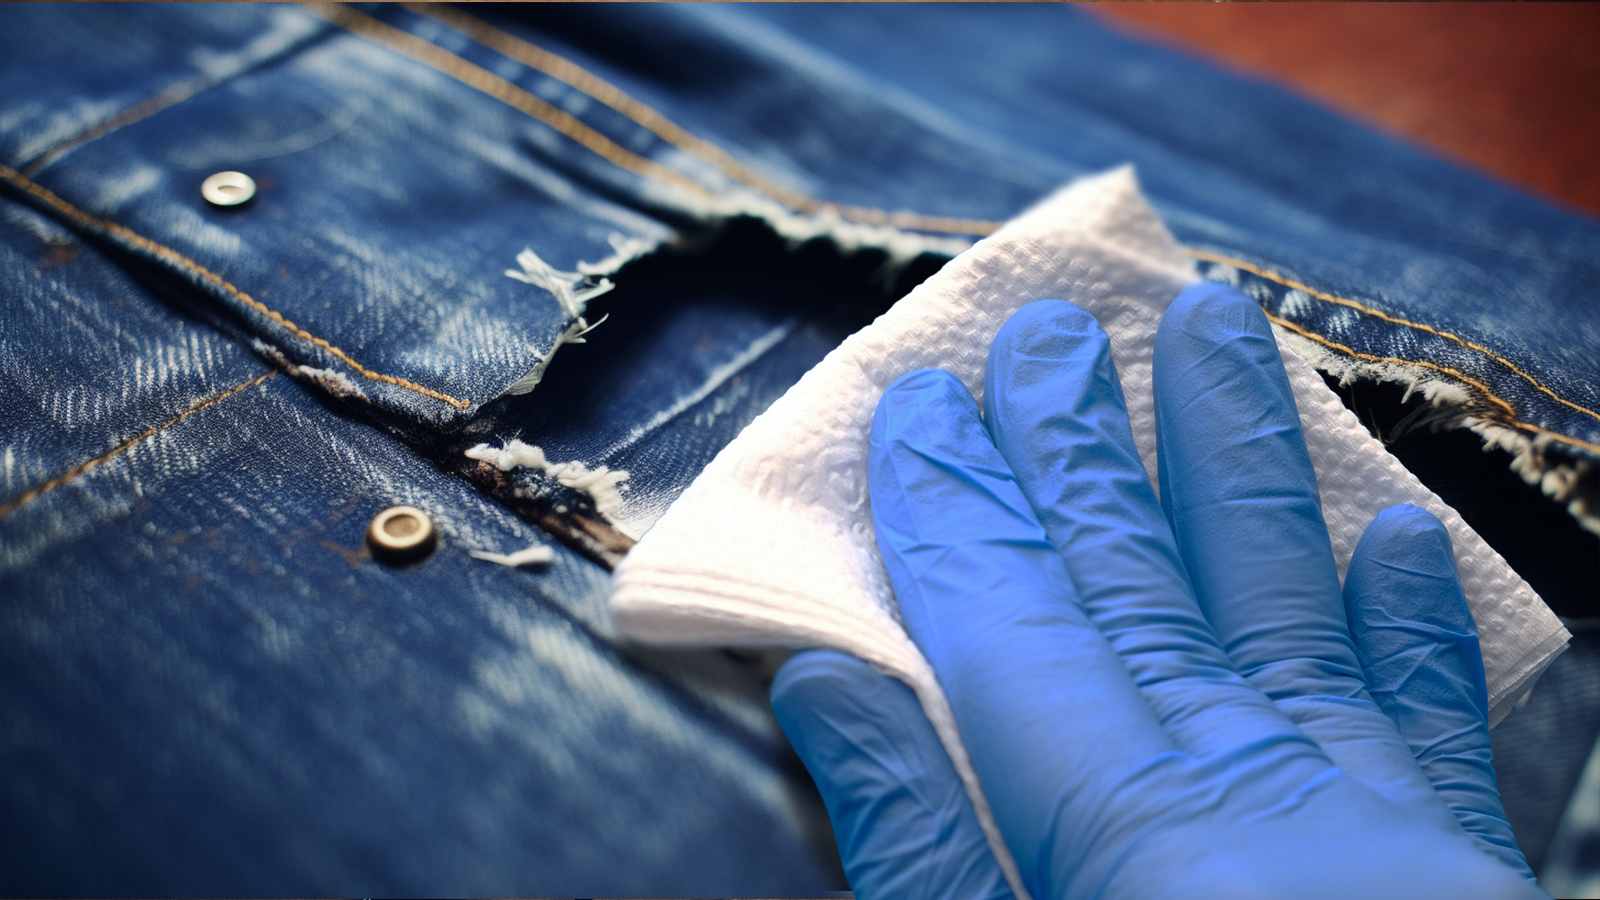 A pair of blue gloves is being used to clean a pair of jeans.